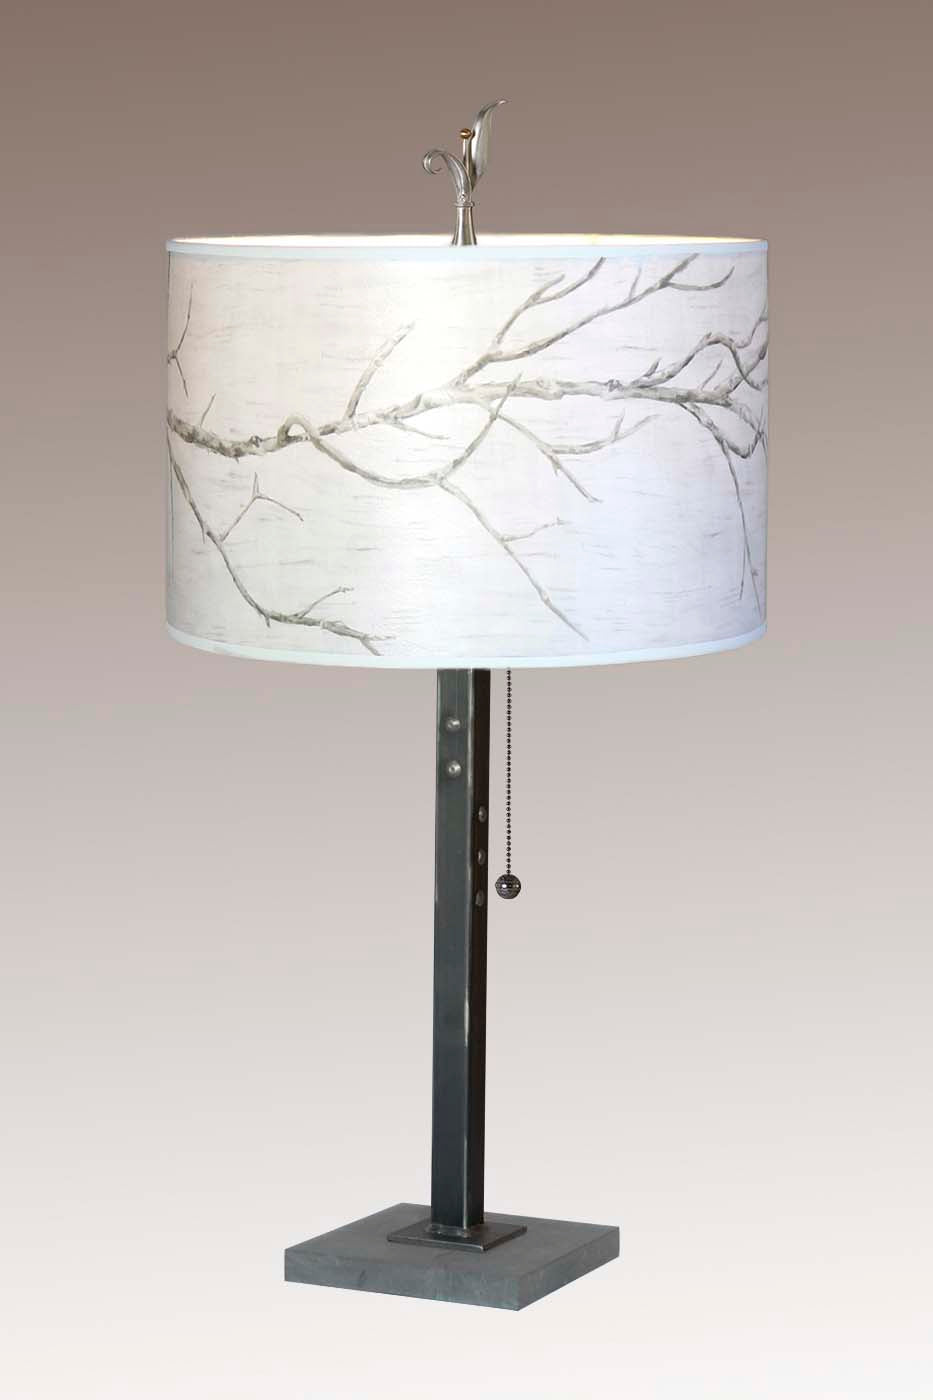 Janna Ugone & Co Table Lamp Steel Table Lamp with Large Drum Shade in Sweeping Branch